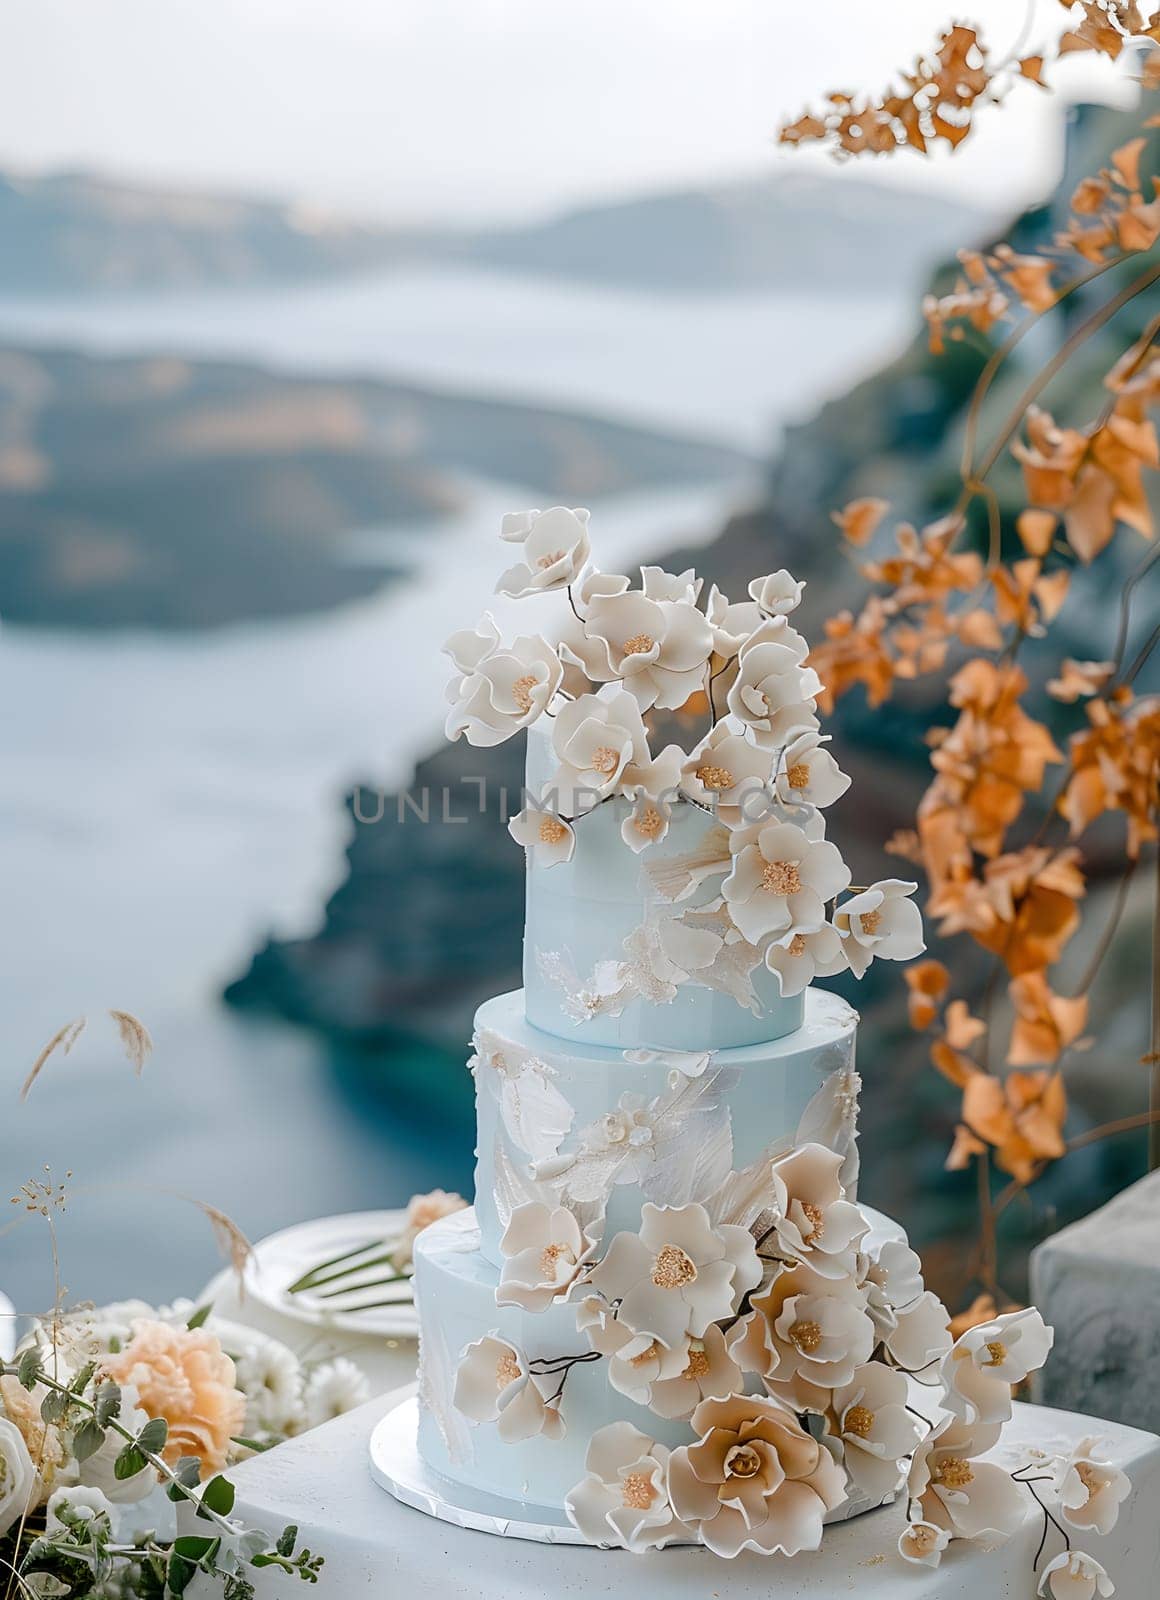 Wedding cake with flowers on table by ocean, perfect for a beach ceremony by Nadtochiy